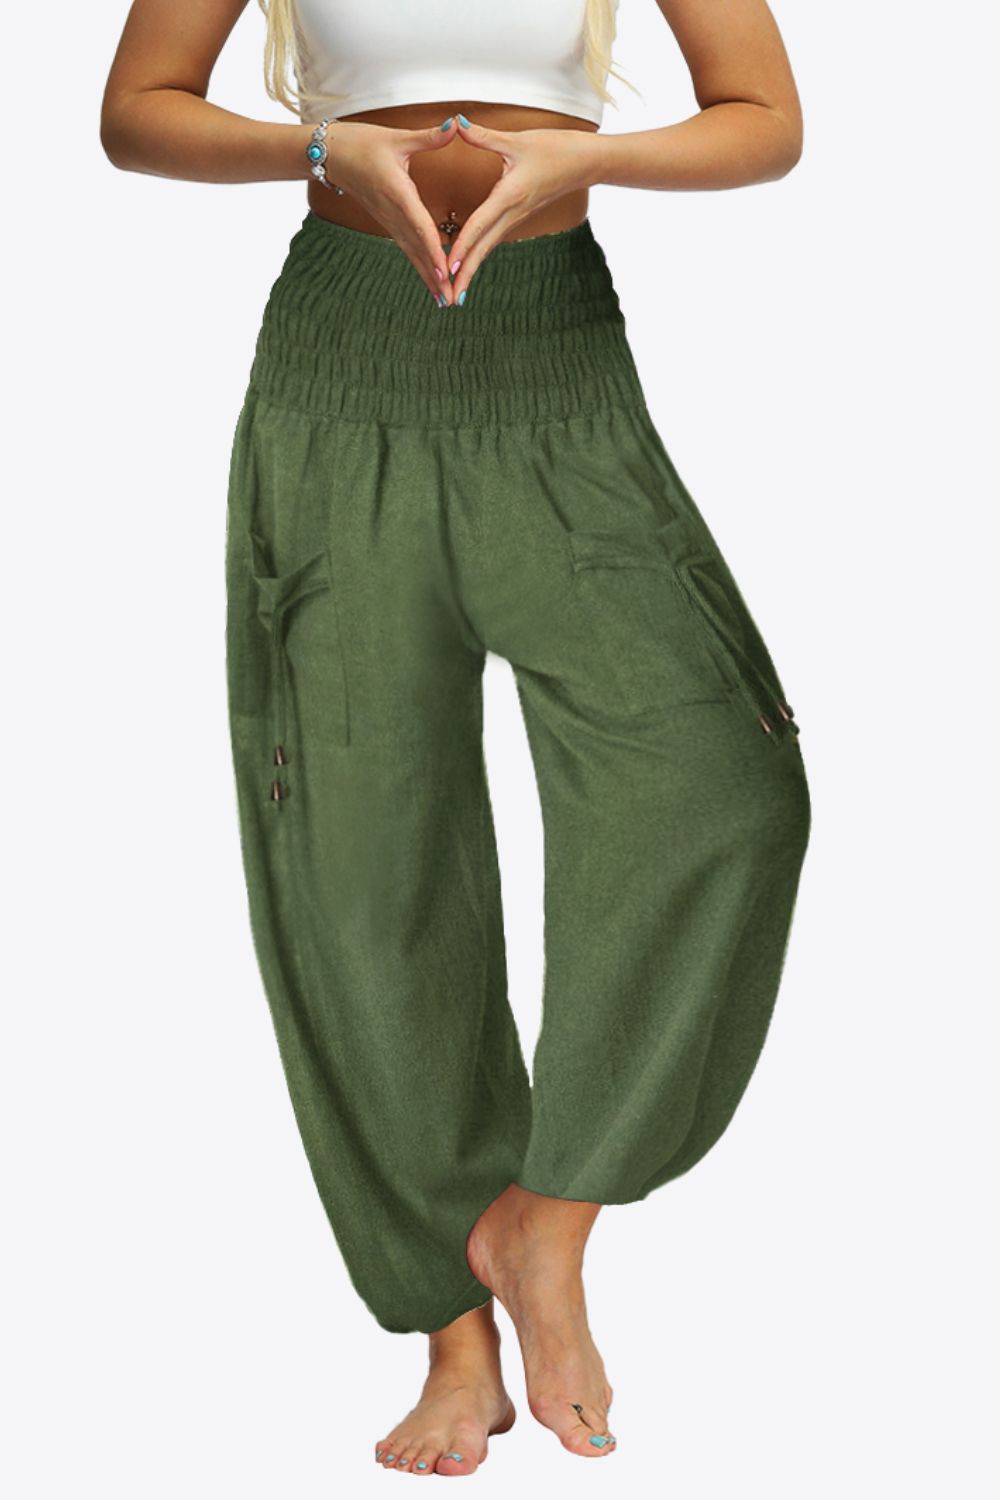 Smocked Long Joggers with Pockets - Dark Green / S - Bottoms - Pants - 13 - 2024